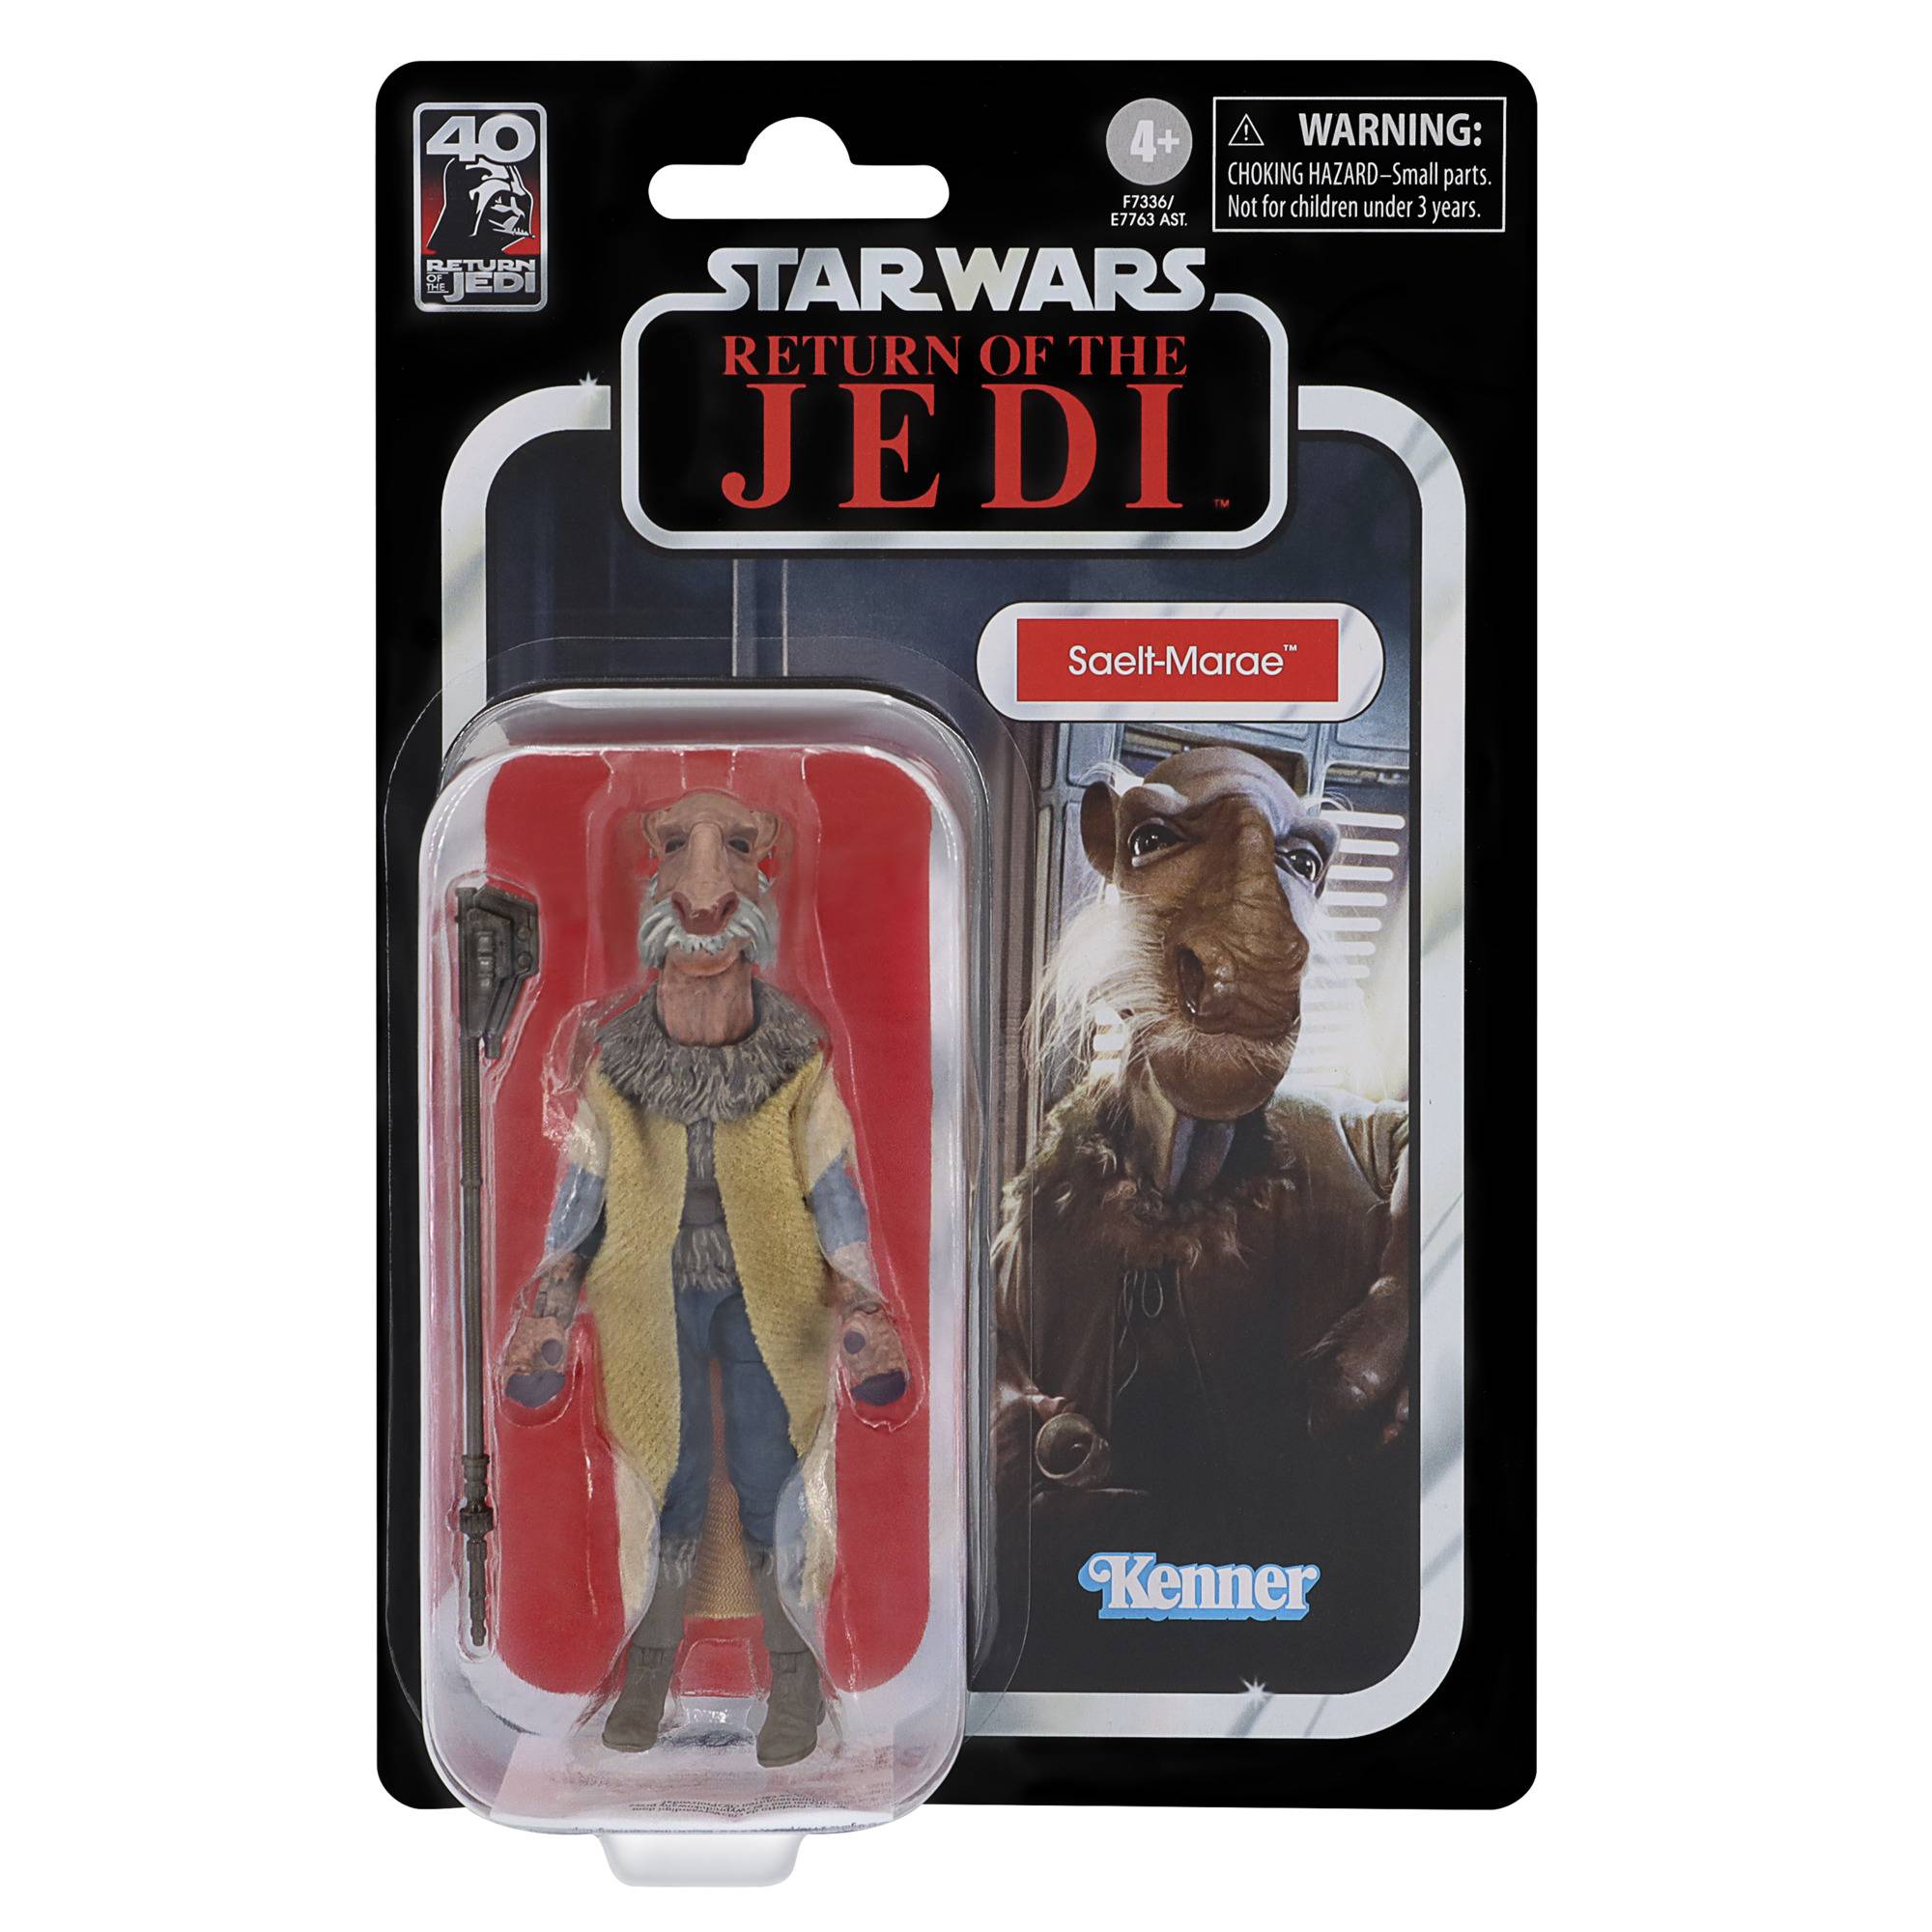 Star Wars - The Vintage Collection - Return of the Jedi - Saelt-Marae 3.75in Action Figure